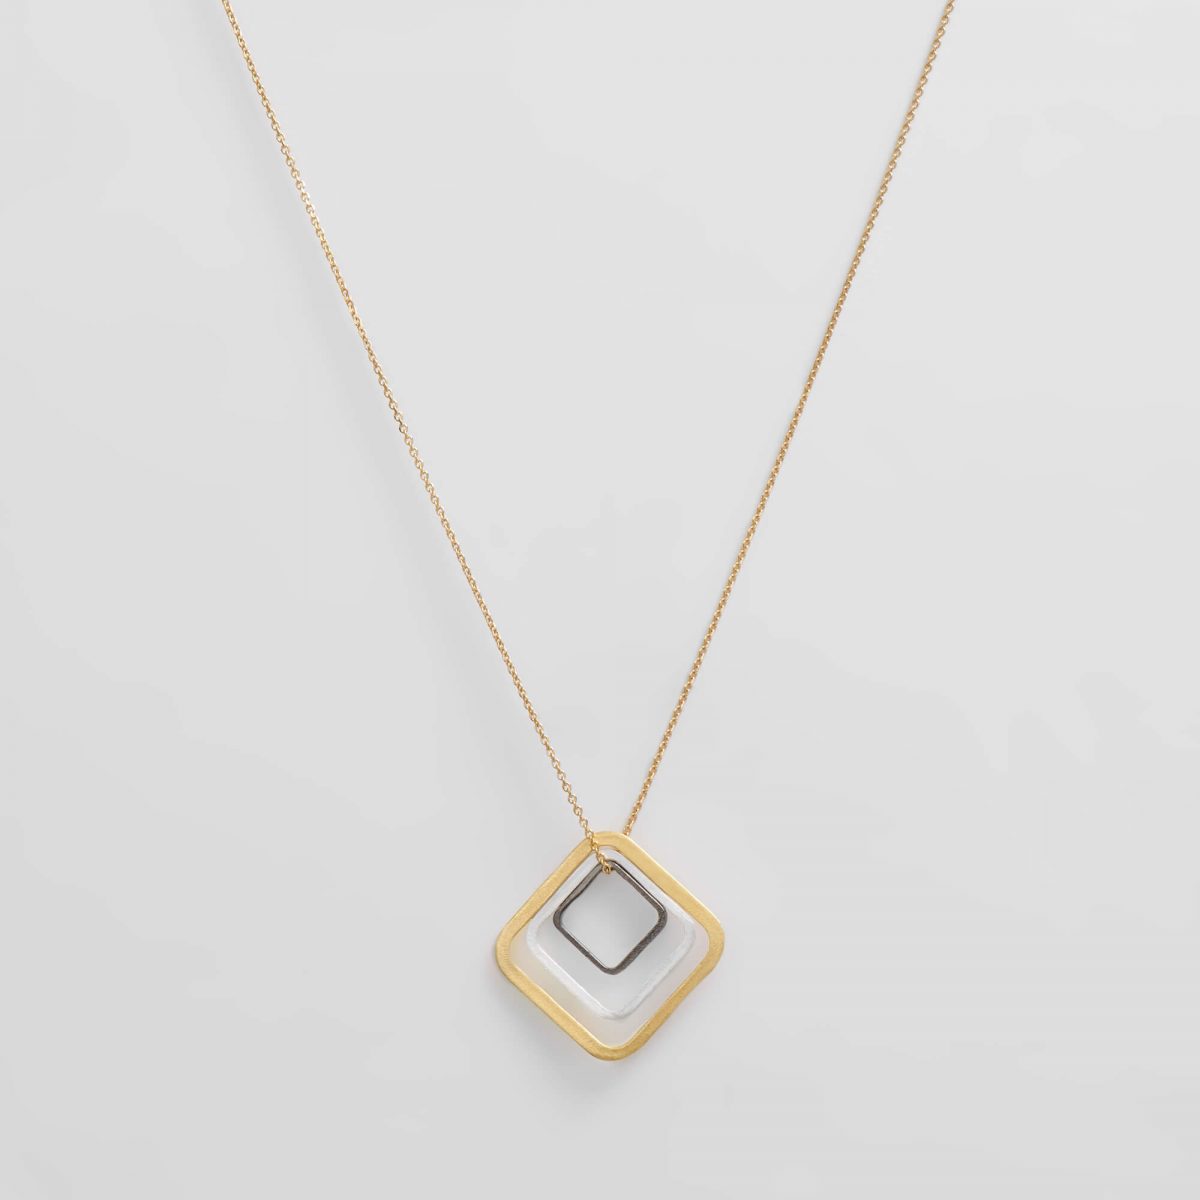 Gold Square Necklace by Xoutou's